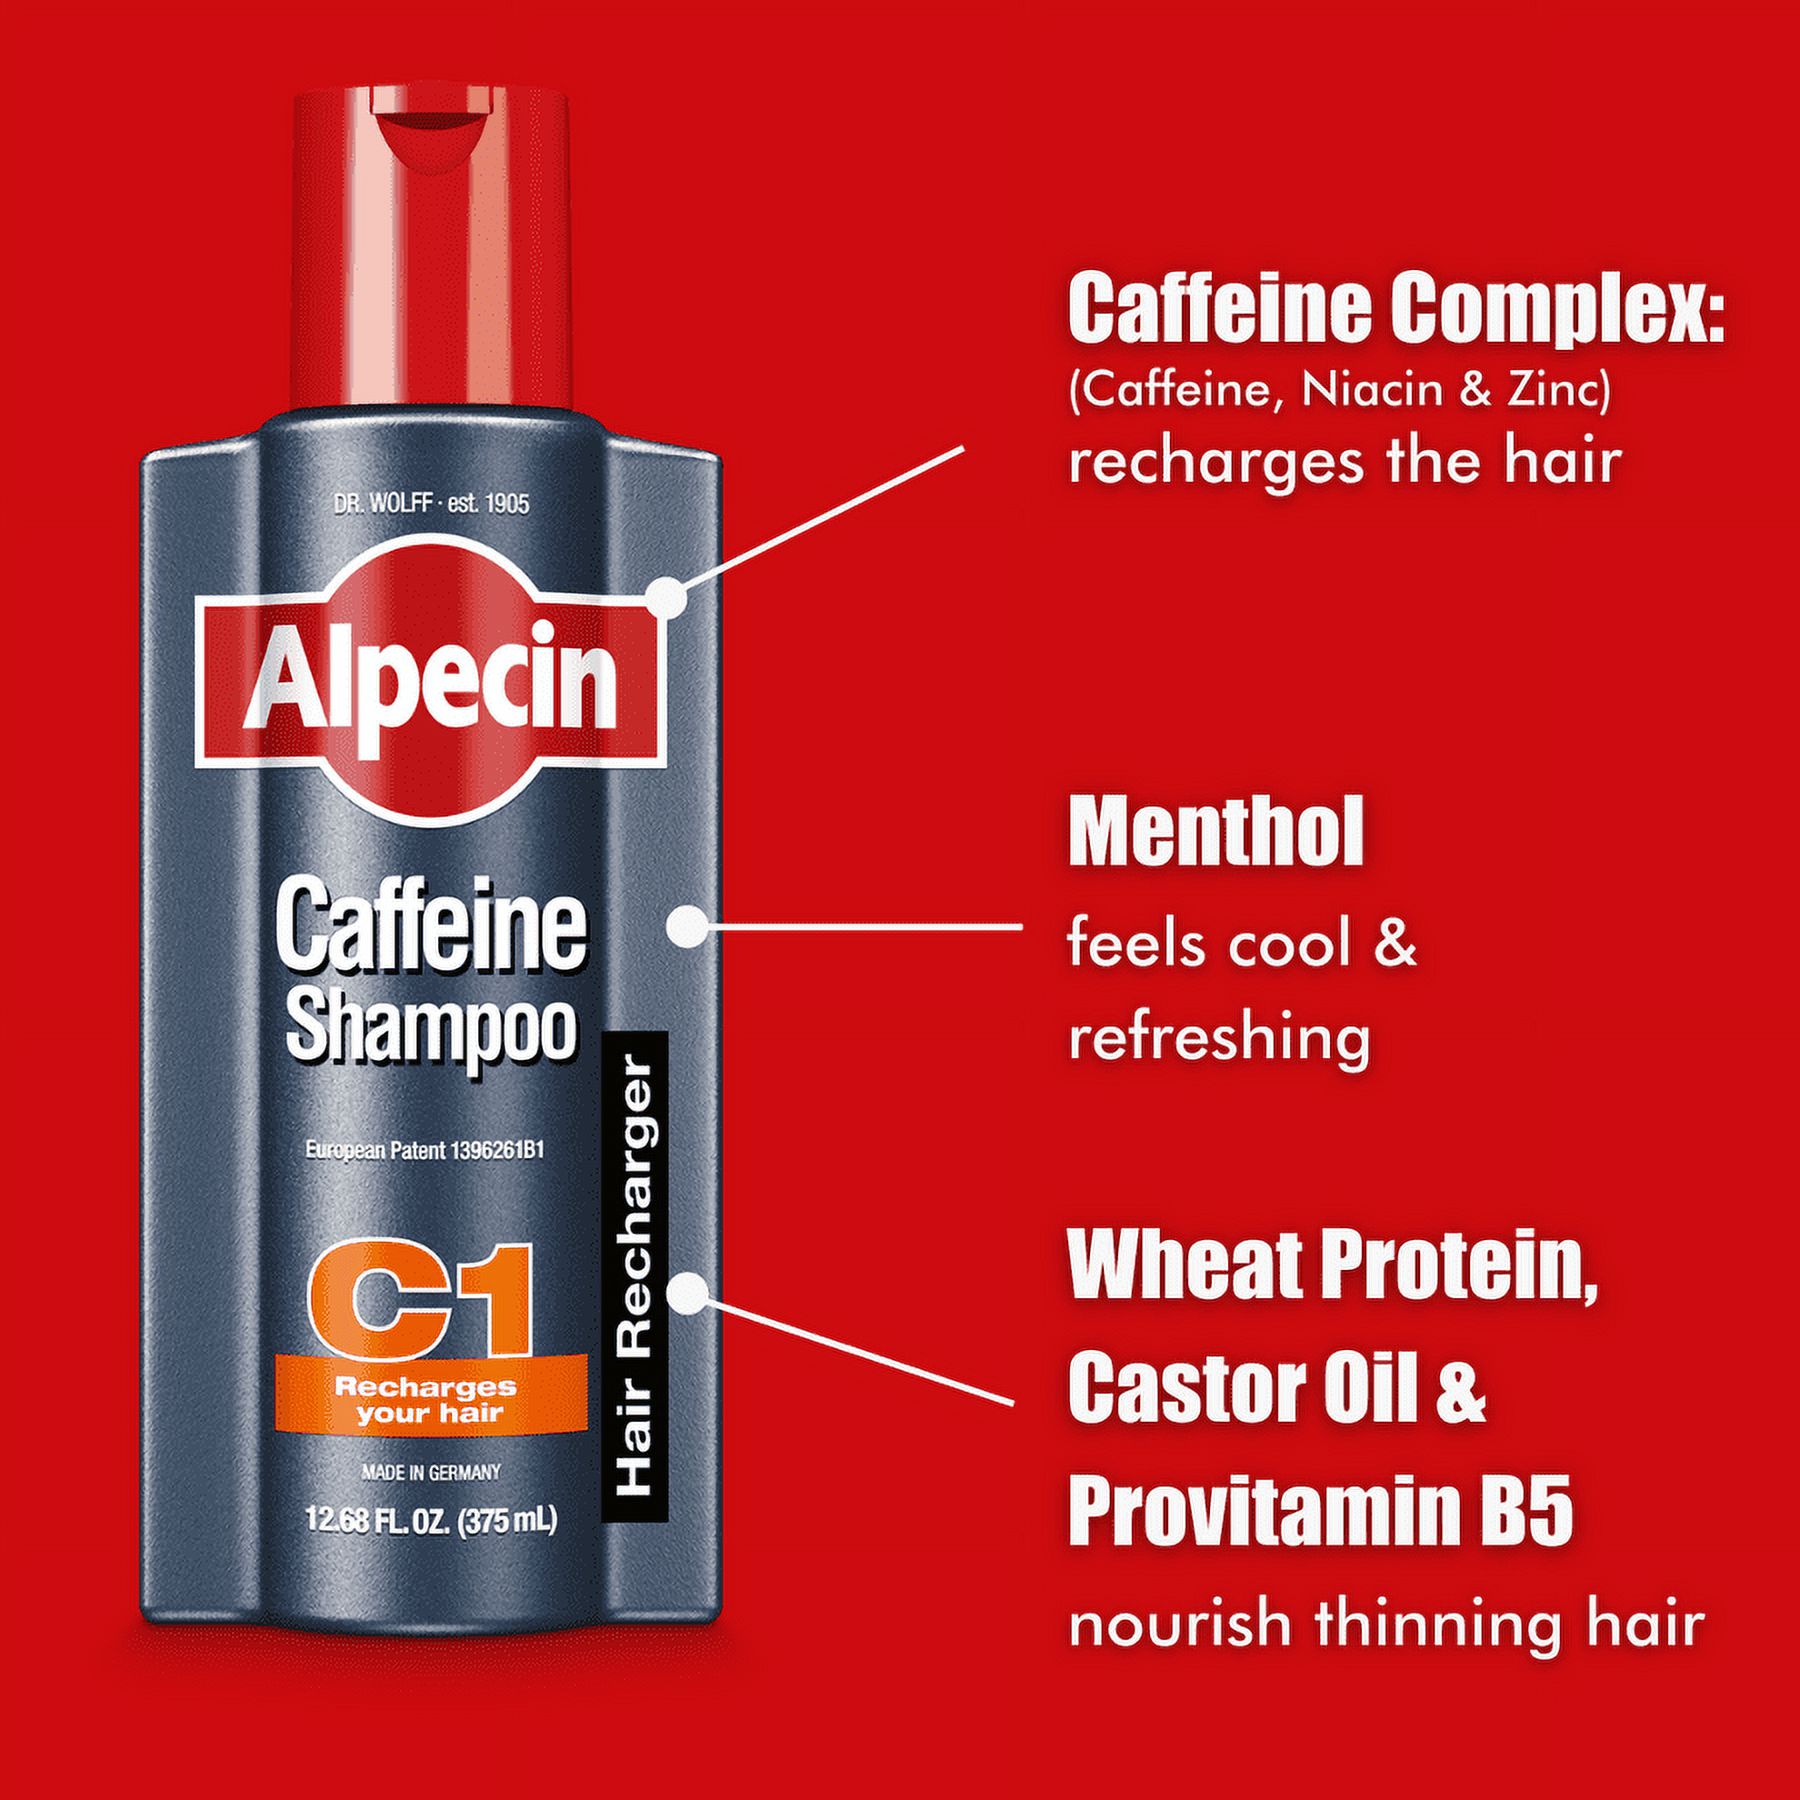 Alpecin Caffeine Shampoo C1 - Cleanses the Scalp to Promote Natural Hair Growth - image 3 of 5